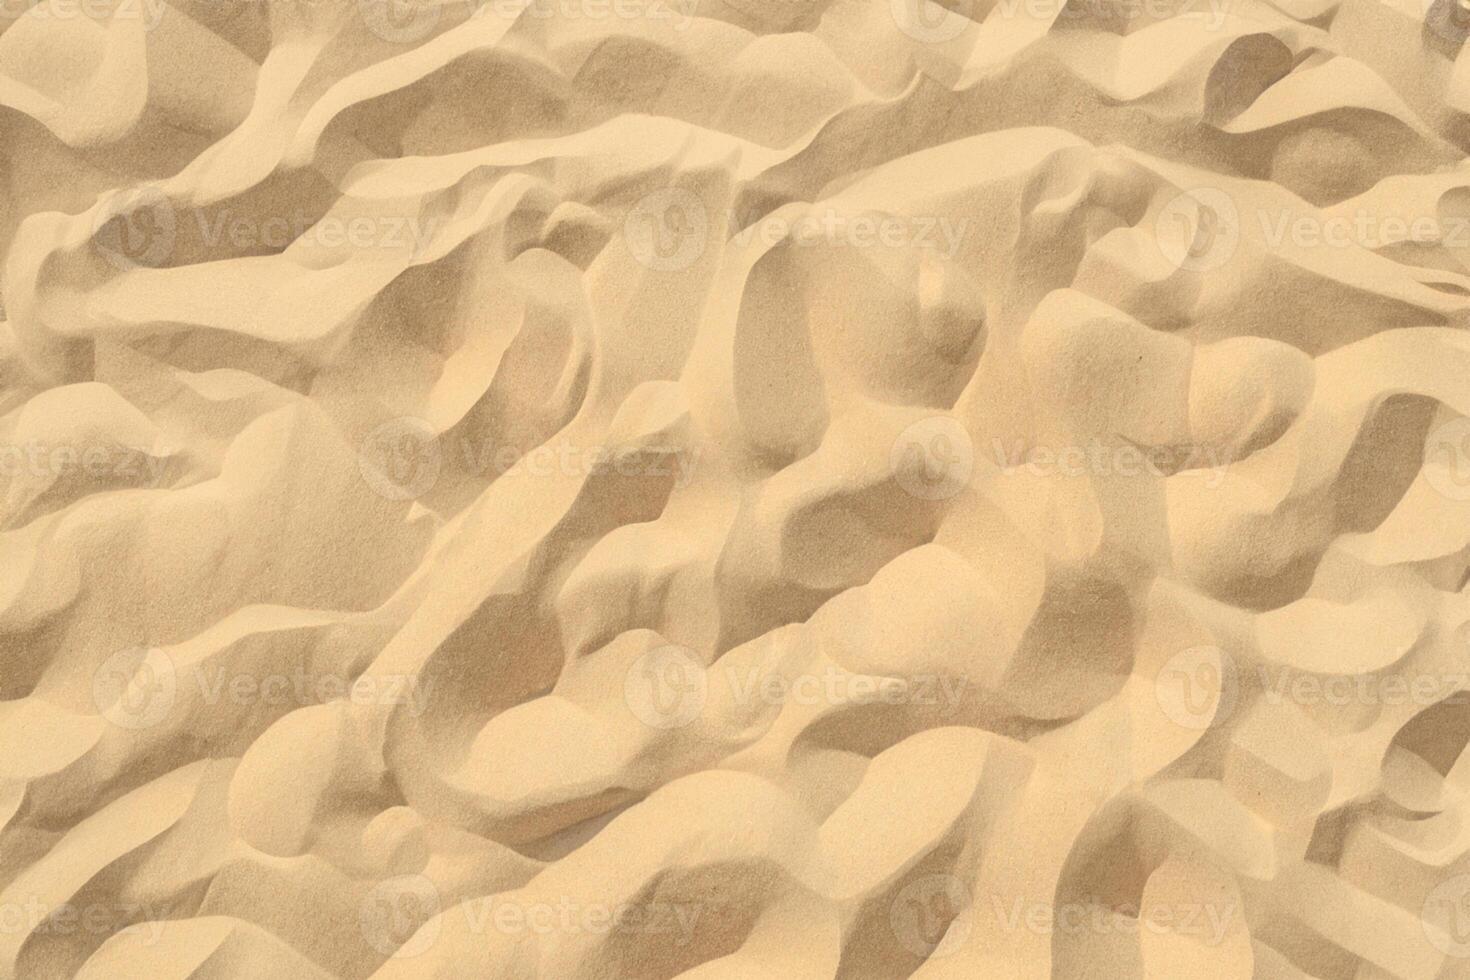 Sands of Serenity Embracing the Beauty of Natural Motif Sands, A Tranquil Tapestry of Earth's Patterns photo